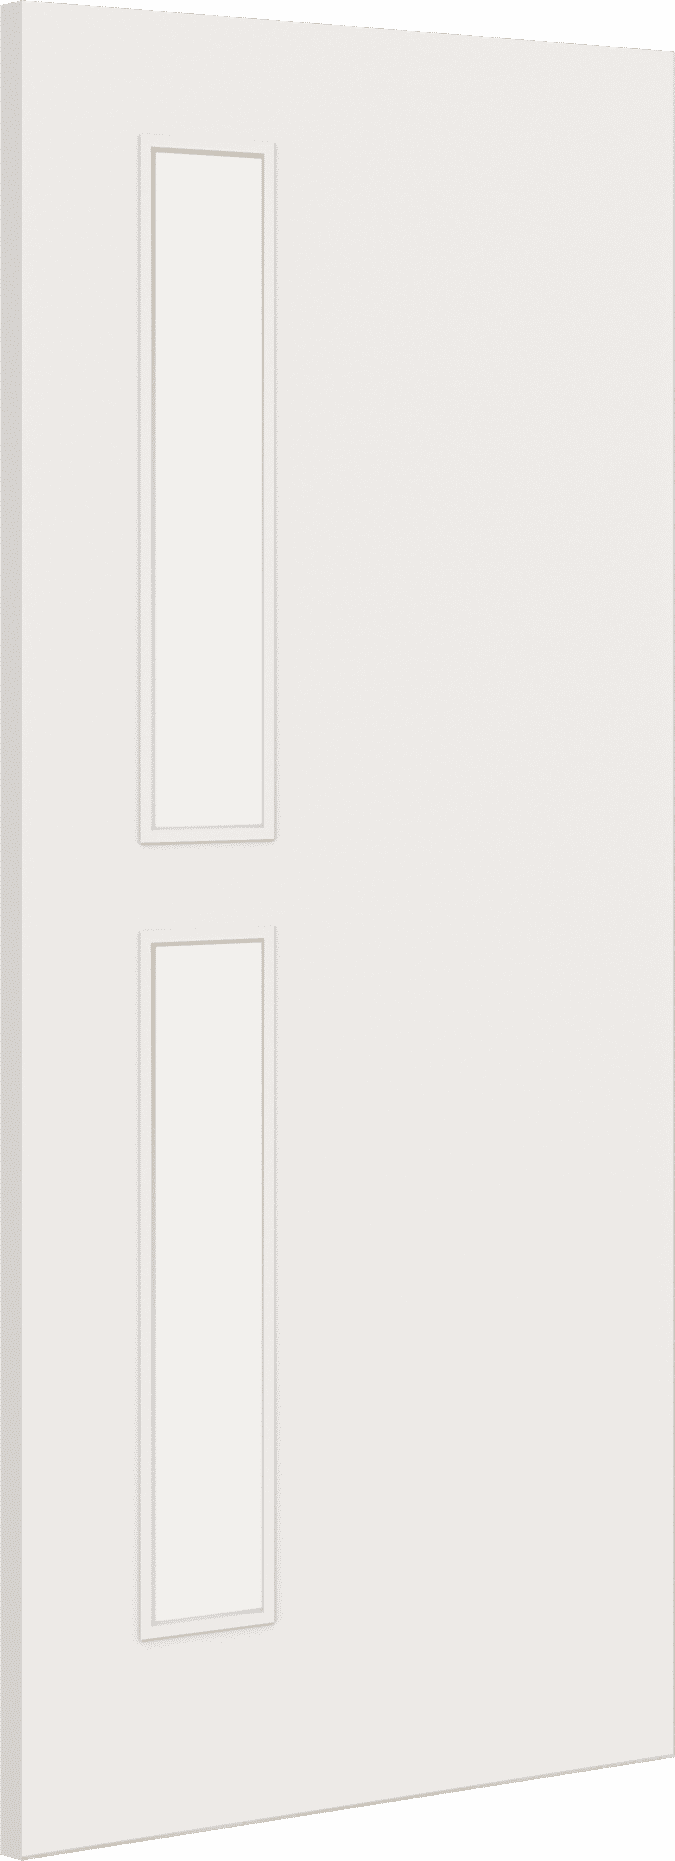 1981mm x 686mm x 44mm (27") Architectural Paint Grade White 07 Clear Glazed Fire Door Blank